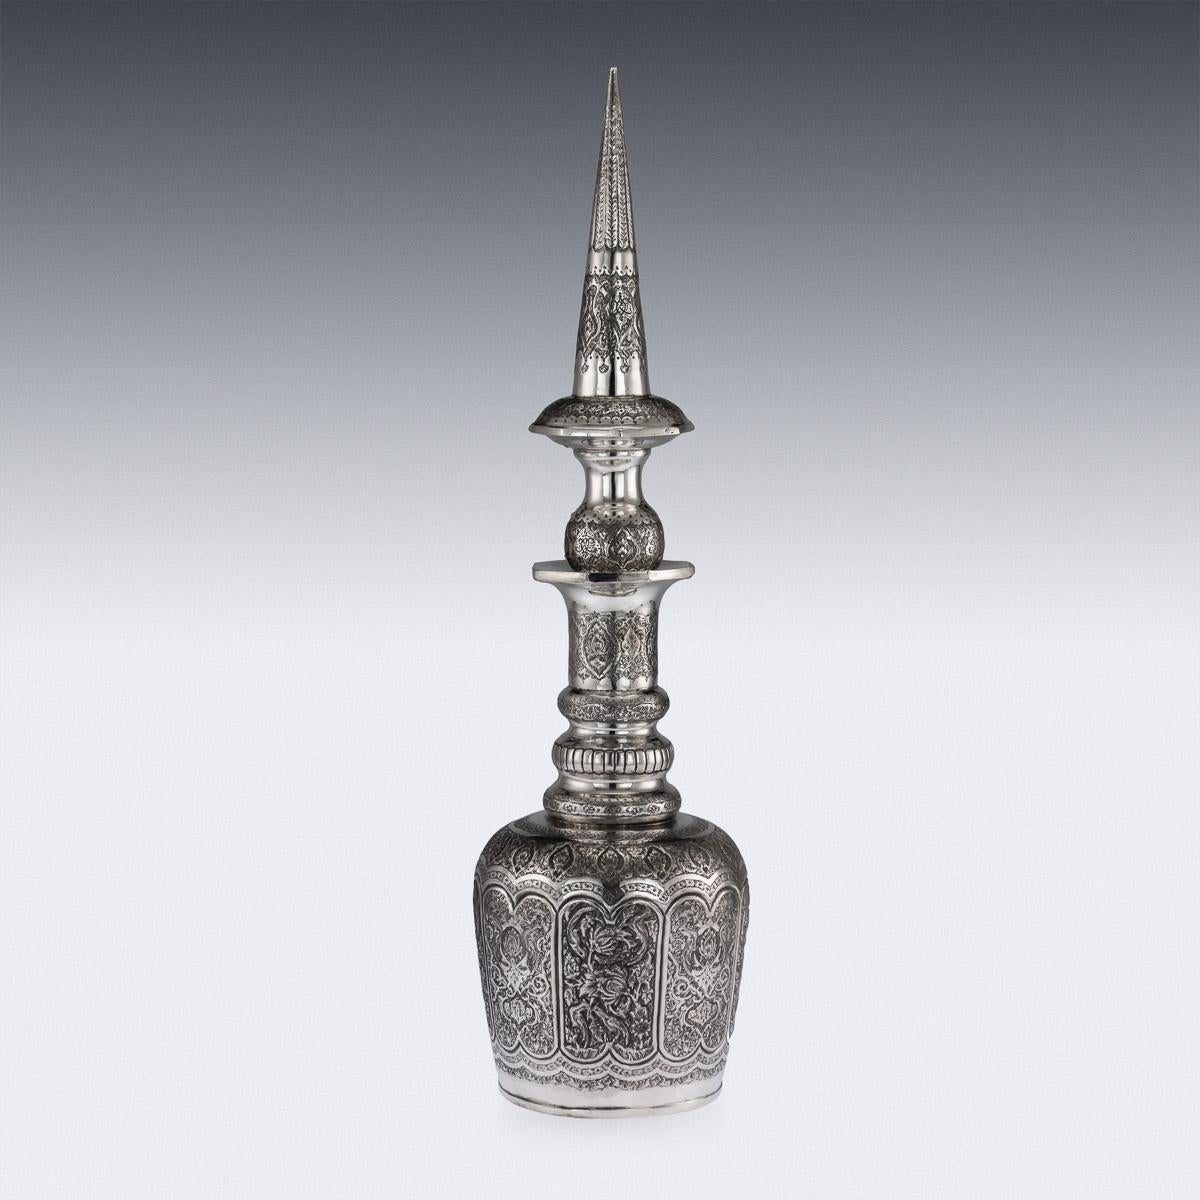 Islamic Stunning 20th Century Persian Massive Solid Silver Repousse Decanter, circa 1950